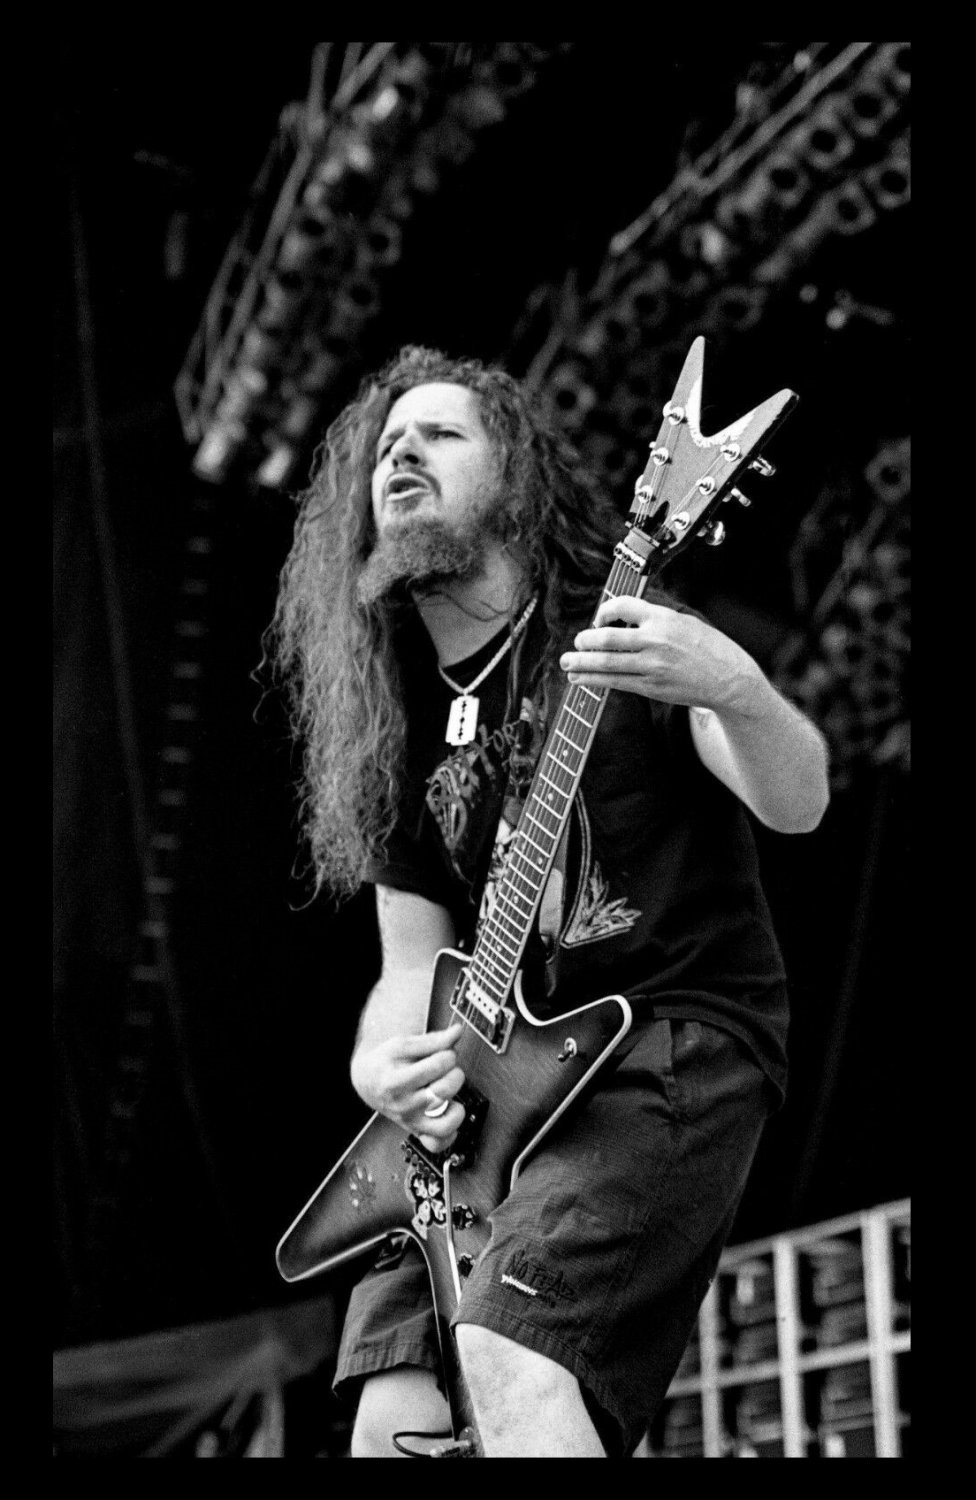 Dimebag Musical Poster 13x19 inches